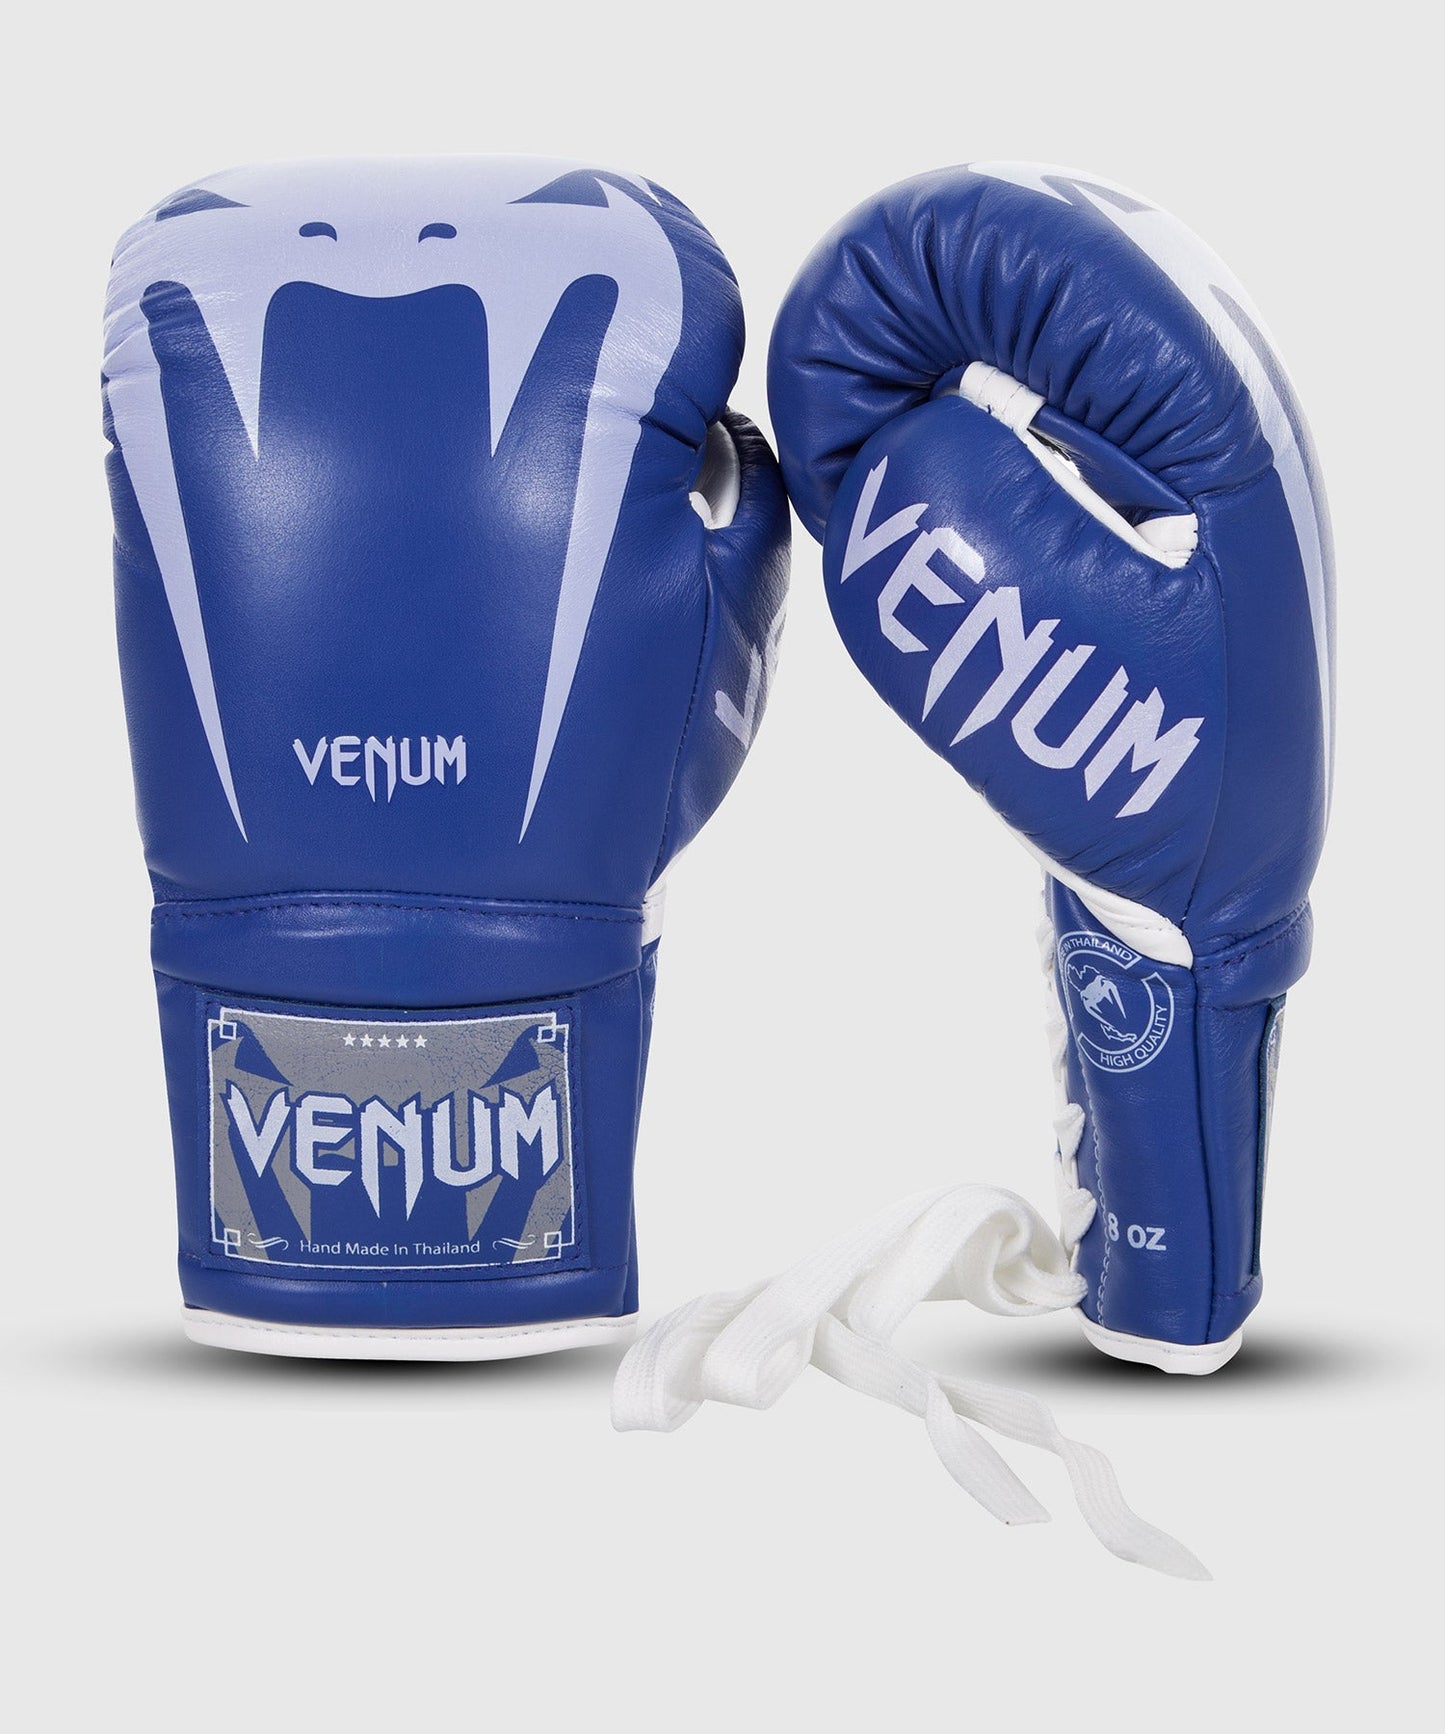 Venum Giant 3.0 Boxing Gloves - Nappa Leather - With Laces - Blue